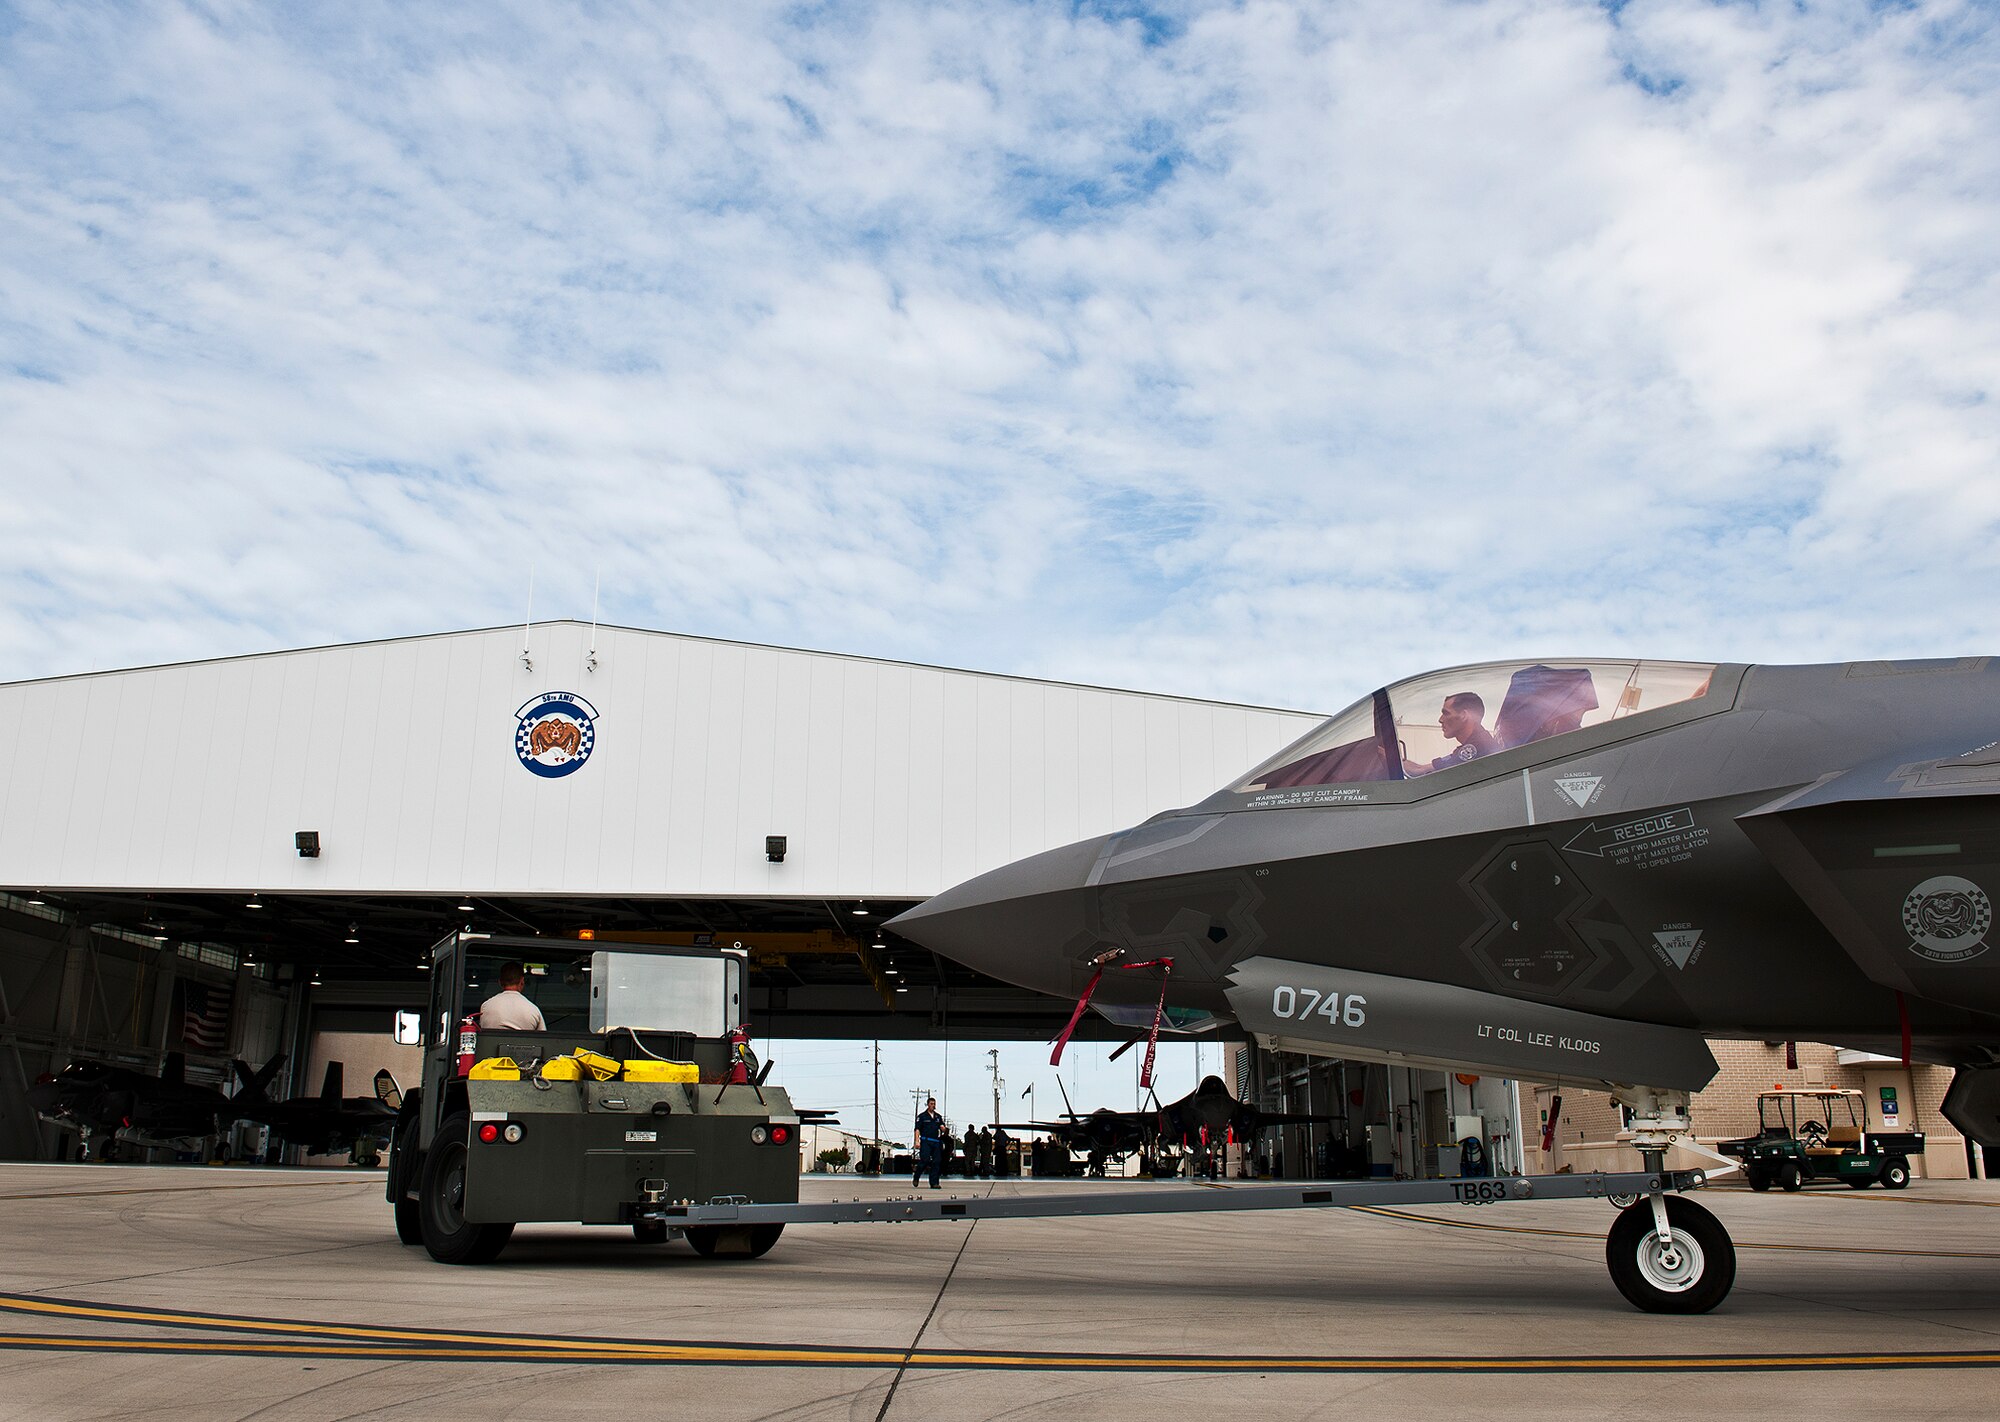 Members of the 33rd Maintenance Squadron move an Air Force F-35A Lightning II off the flightline and into a hangar at Eglin Air Force Base, Fla., Aug. 27.  The 33rd Fighter Wing’s joint strike fighters were moved into hangars in preparation for the arrival of Hurricane Isaac.  The 58th Fighter Squadron hangar held nine A models, while the Marine Fighter Attack Squadron 501 hangar stored the 10 B models.  (U.S. Air Force photo/Samuel King Jr.)  